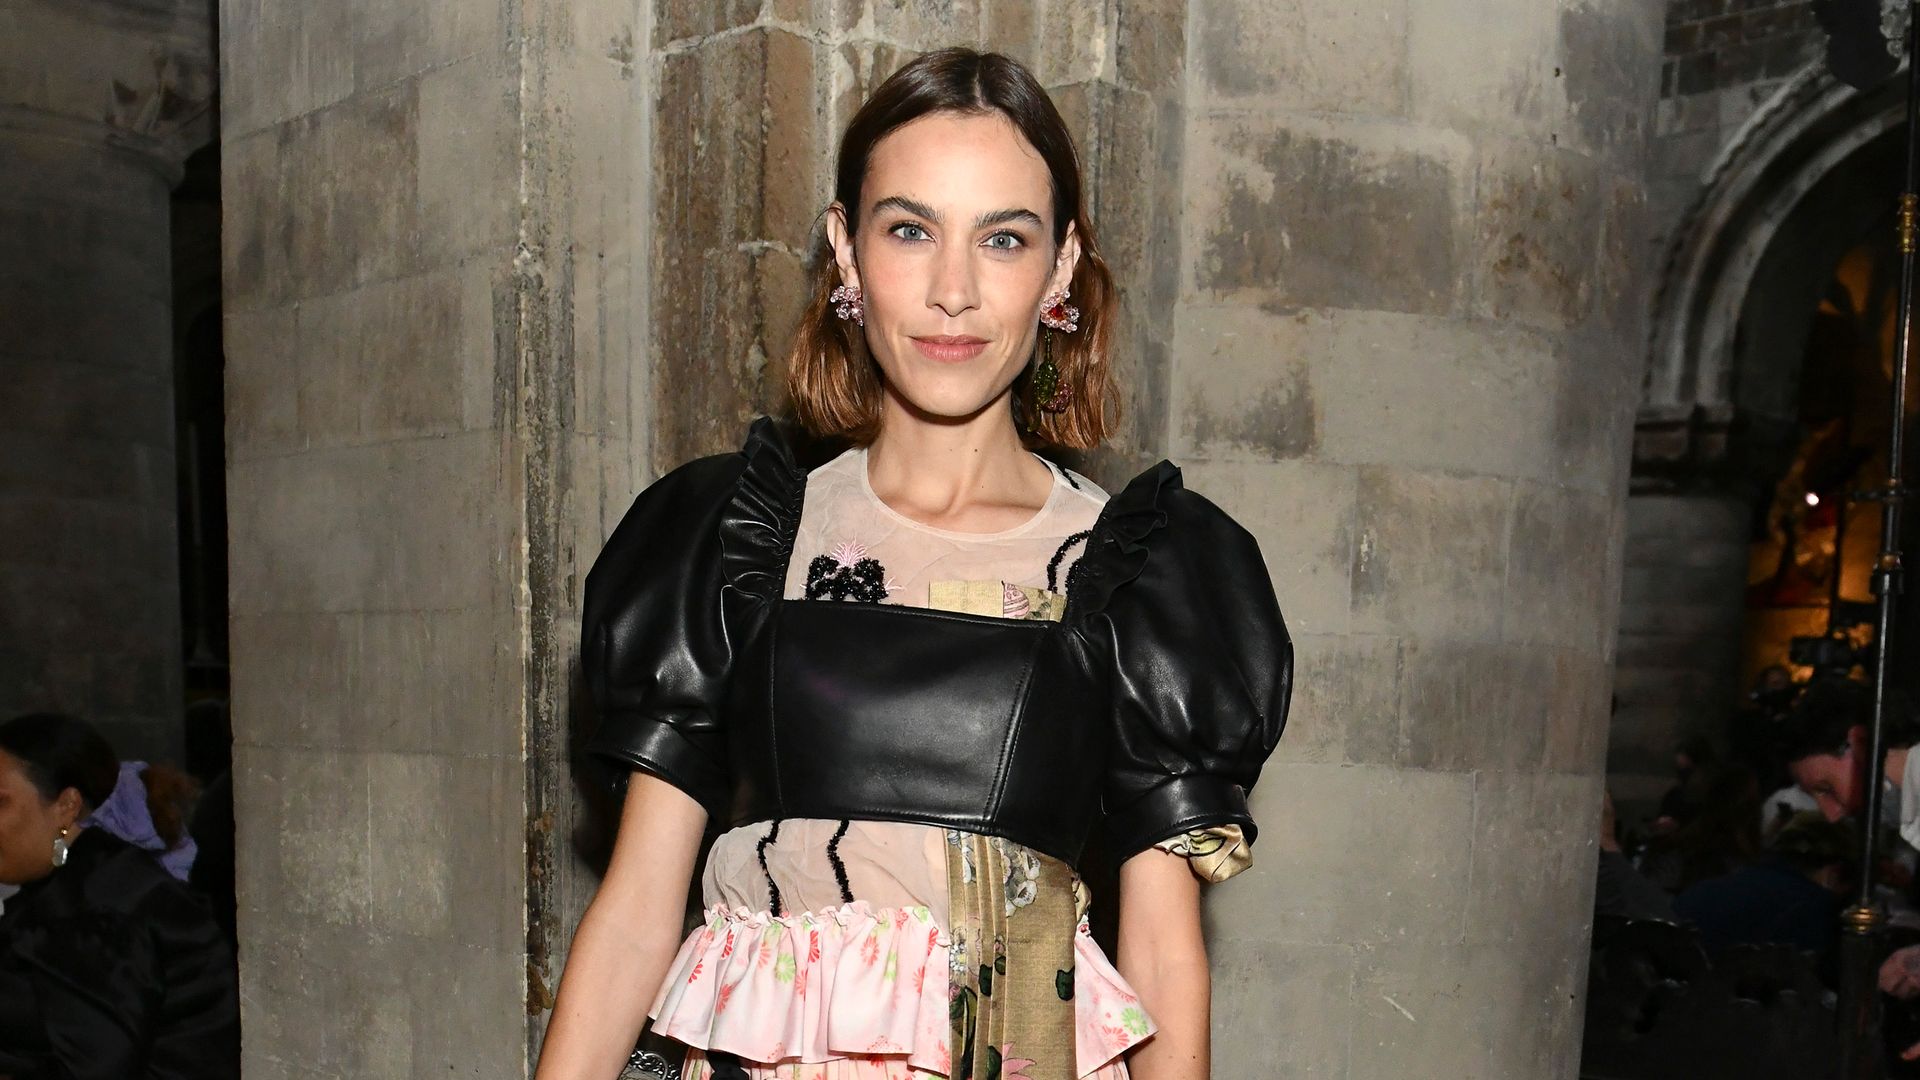 Alexa Chung's no makeup look is a breath of fresh air for spring